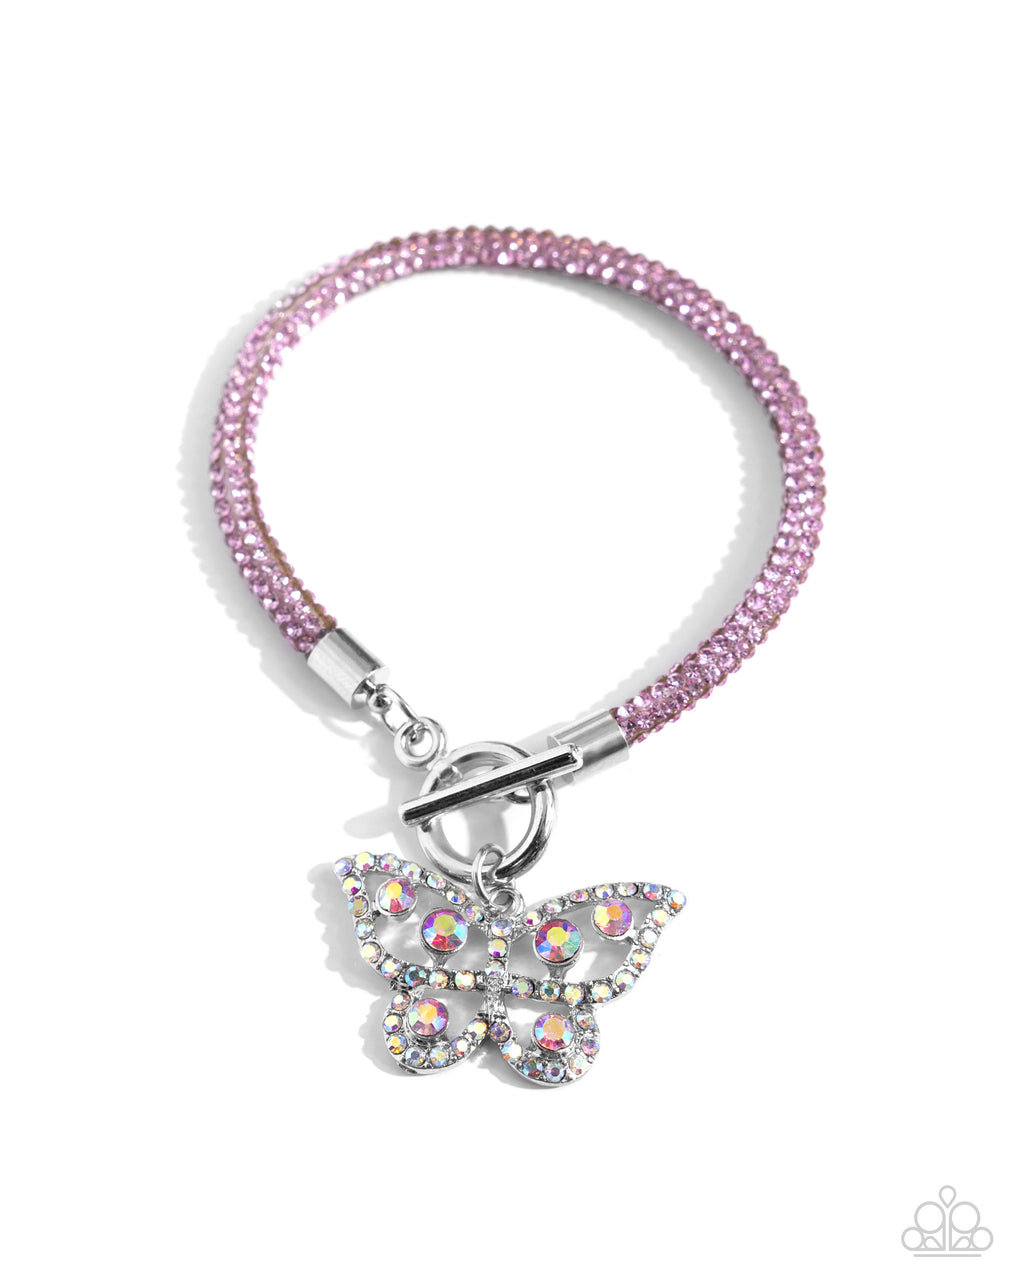 five-dollar-jewelry-aerial-appeal-pink-bracelet-paparazzi-accessories